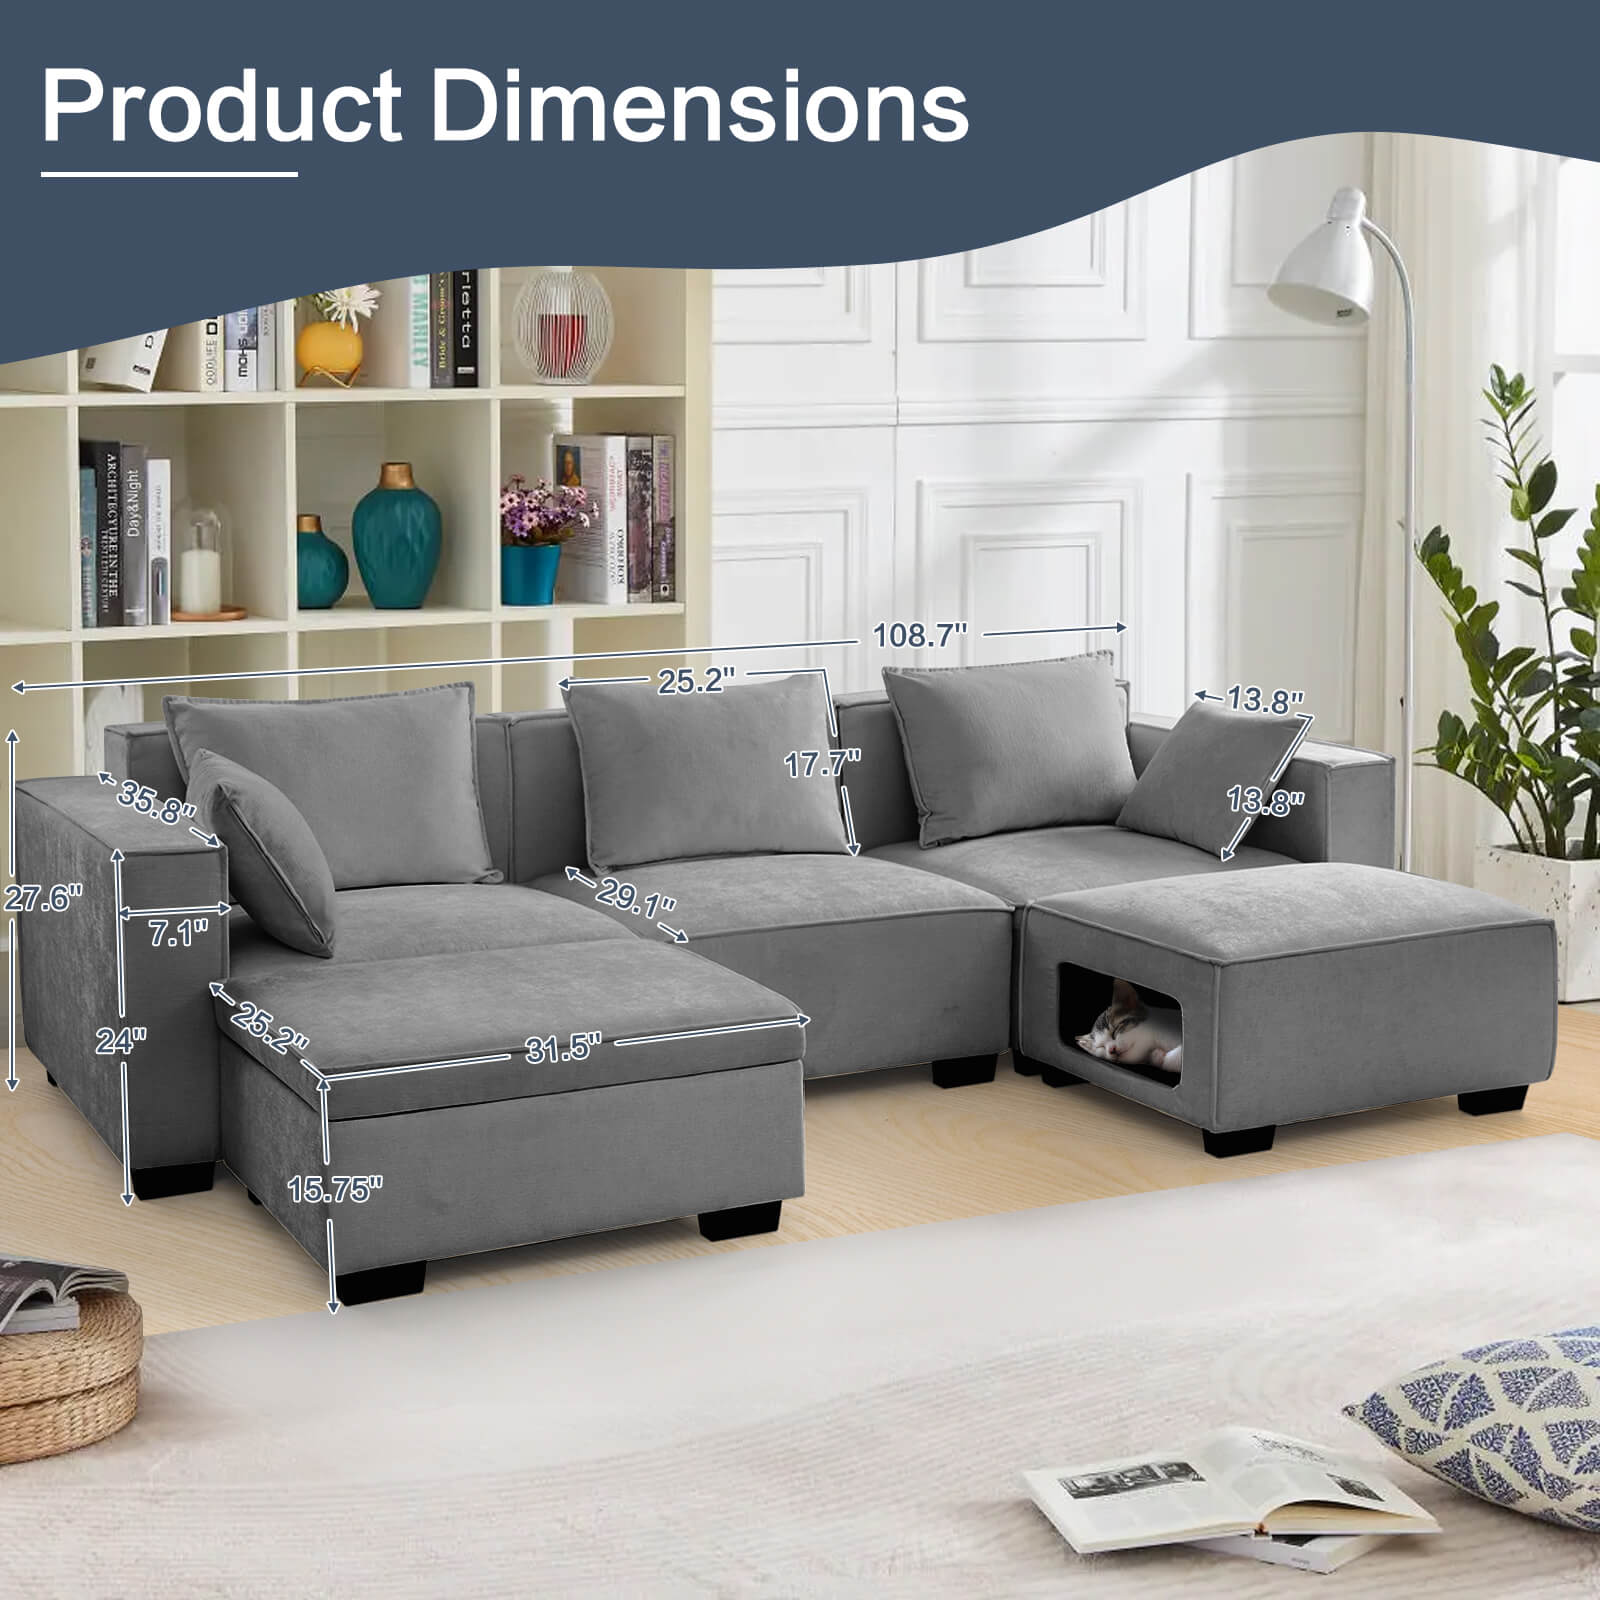 Modular Sectional 5 Seat Sofa, Extra Large U Shaped Couch with Storage & Pet Ottoman